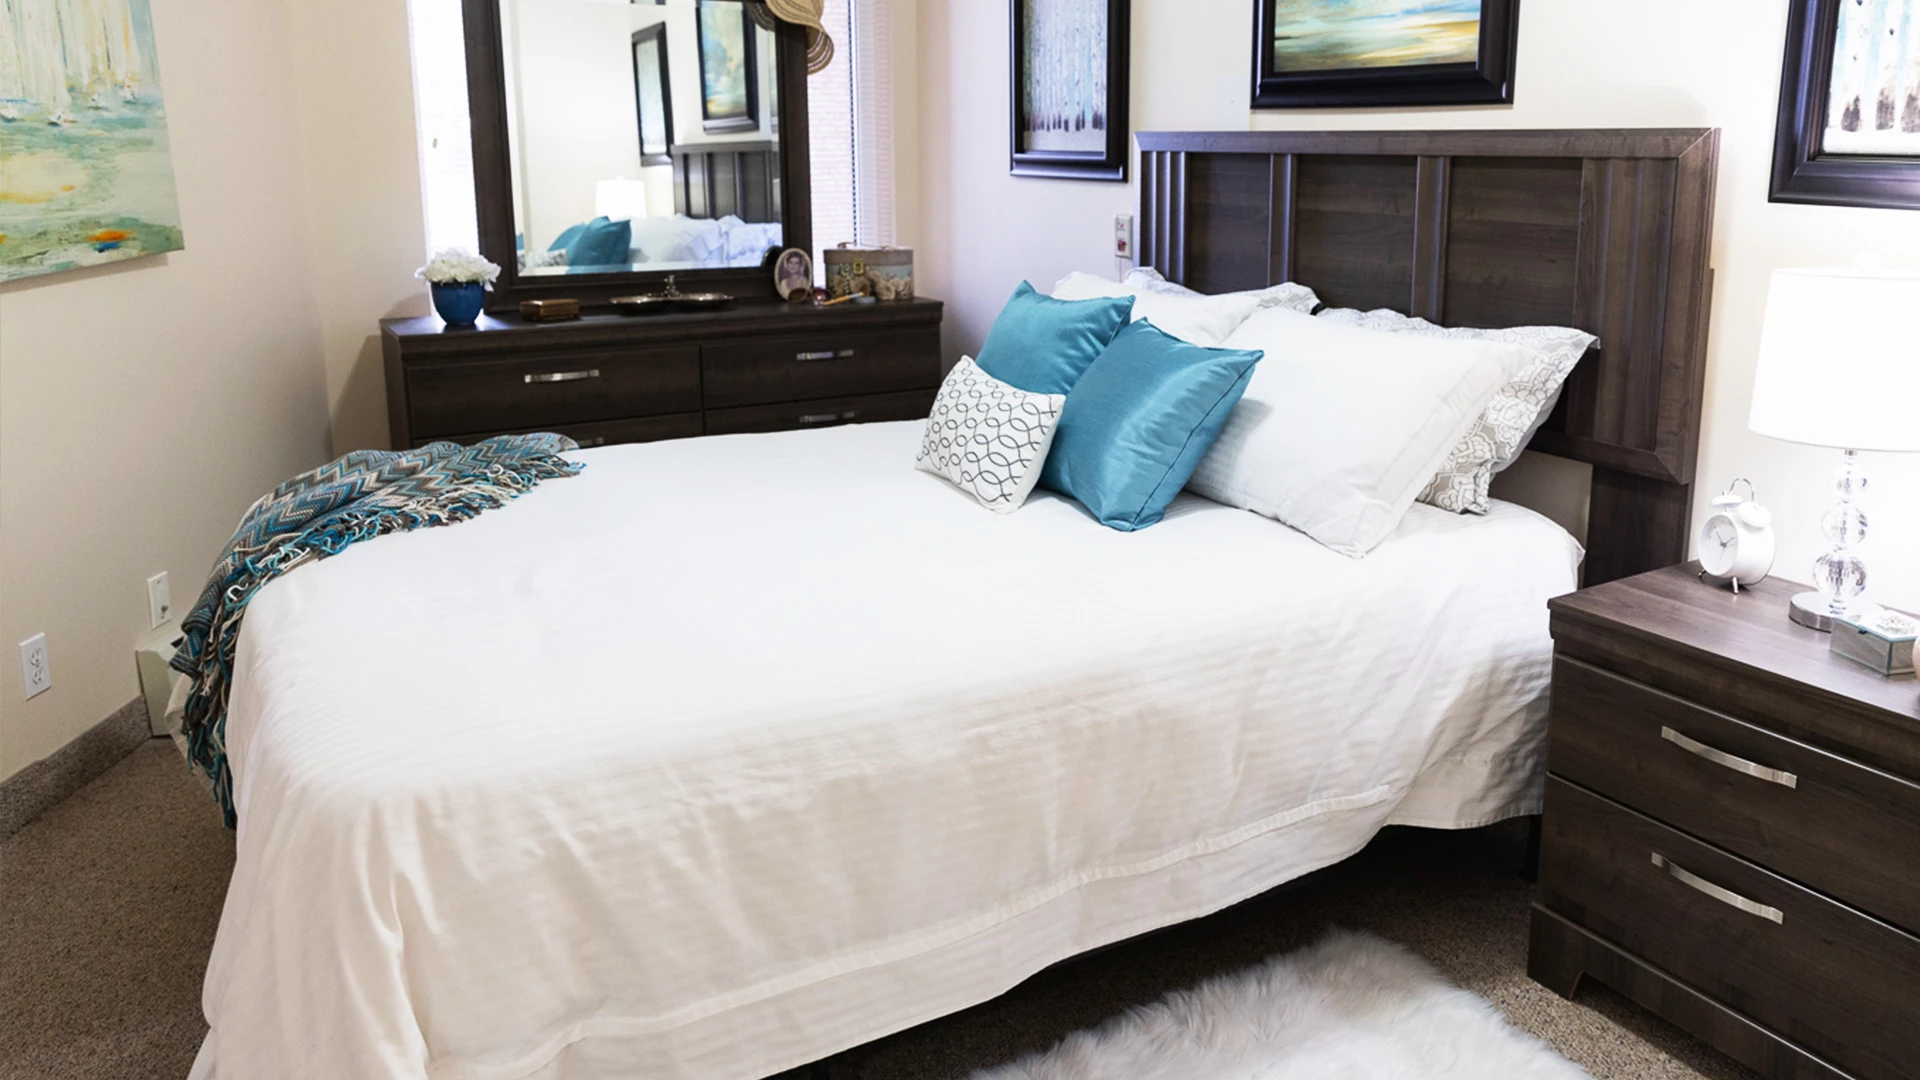 Bed in bedroom with blue pillows